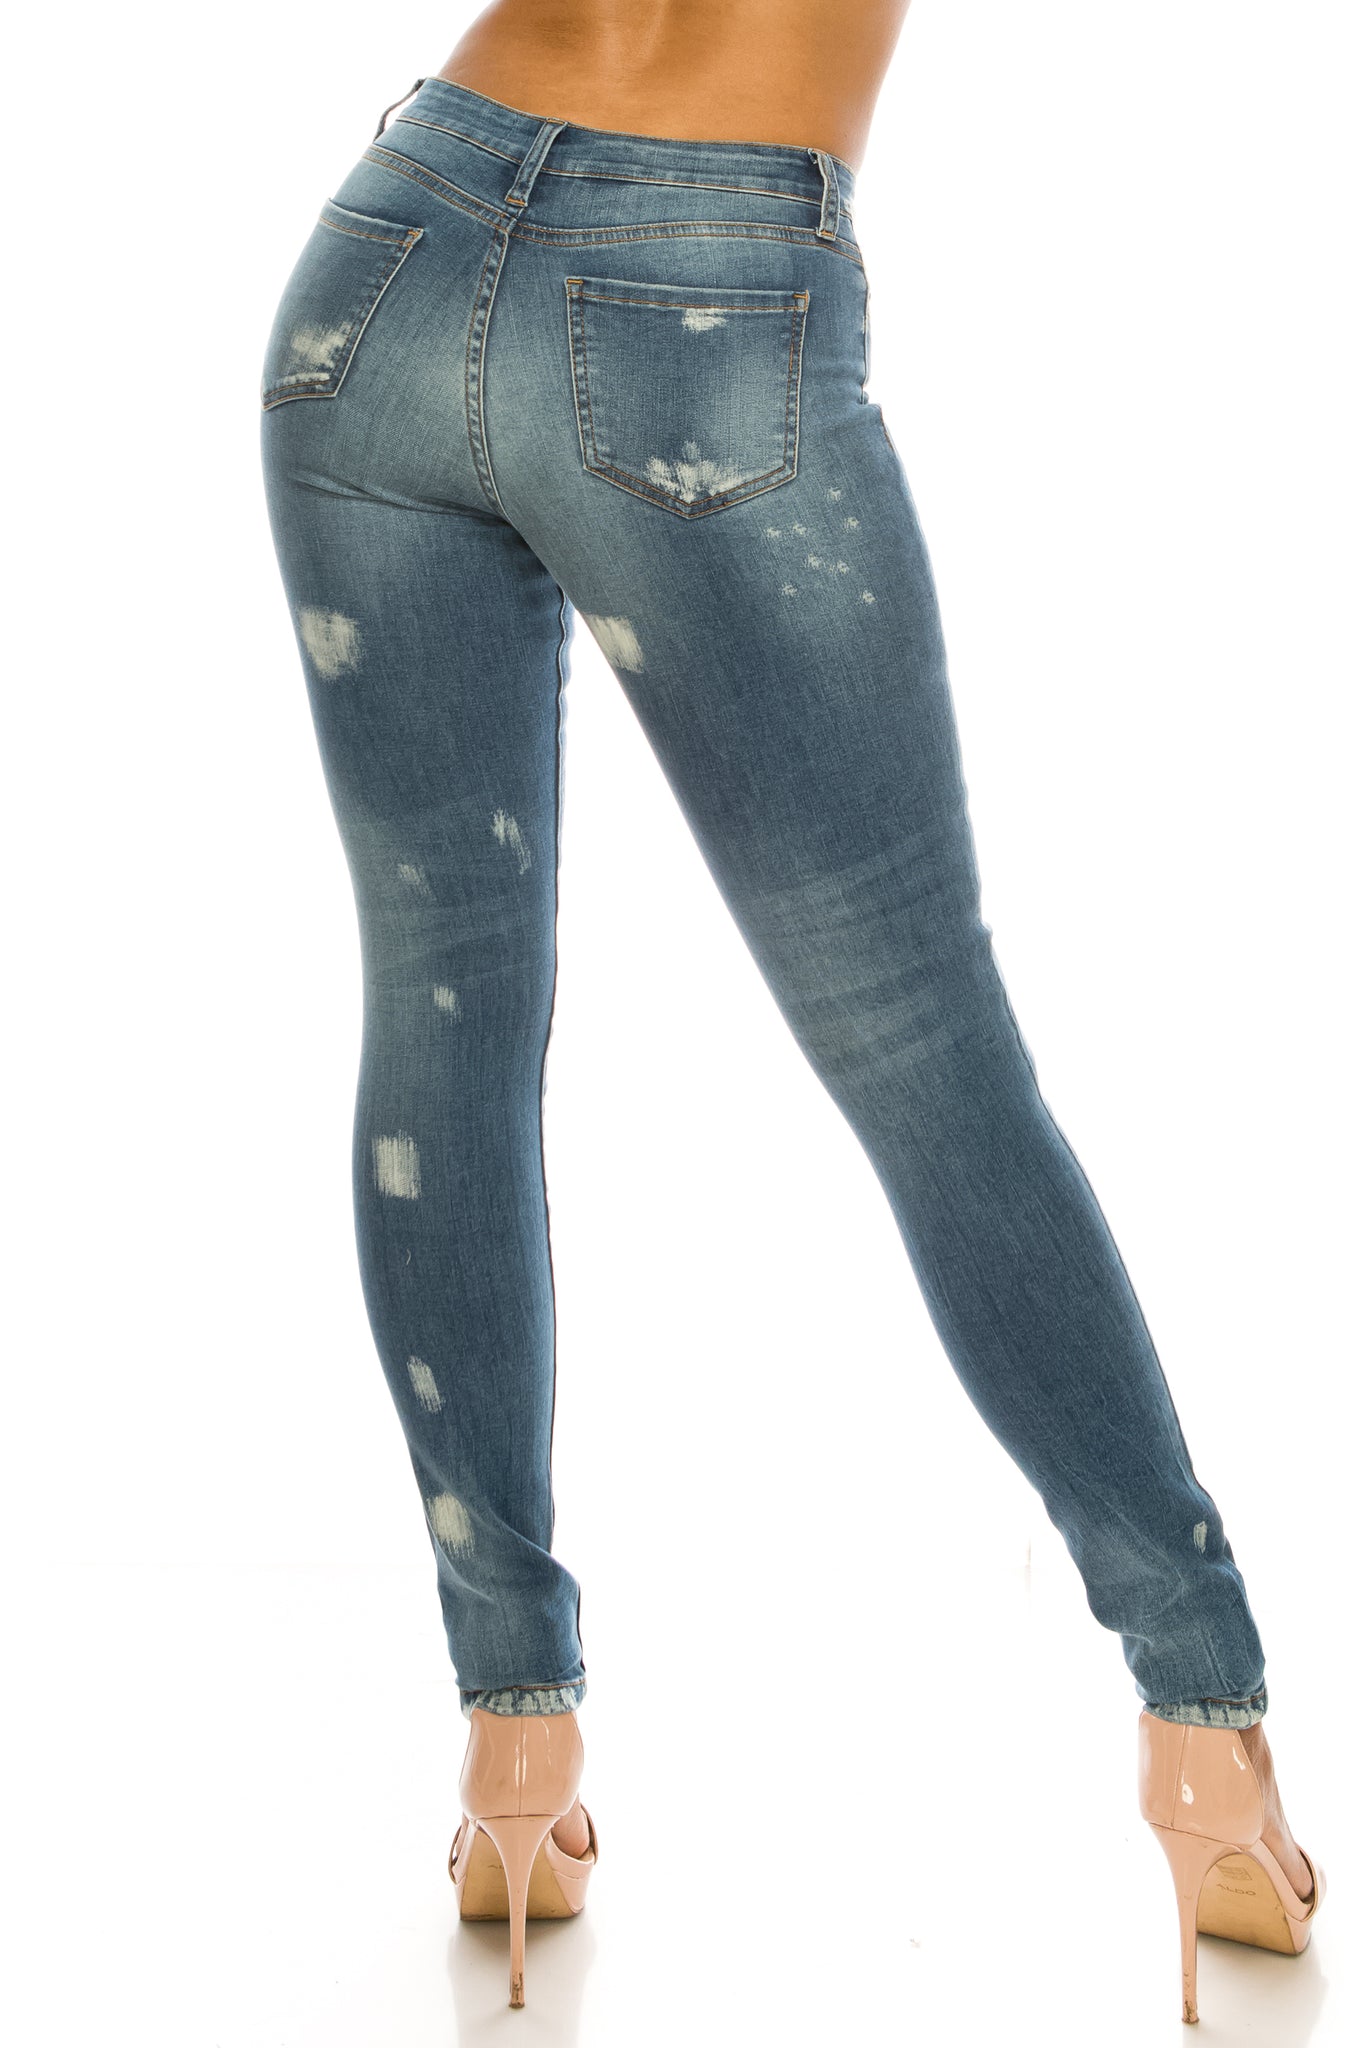 women full length skinny super mid rise mid waisted distressed jeans pants